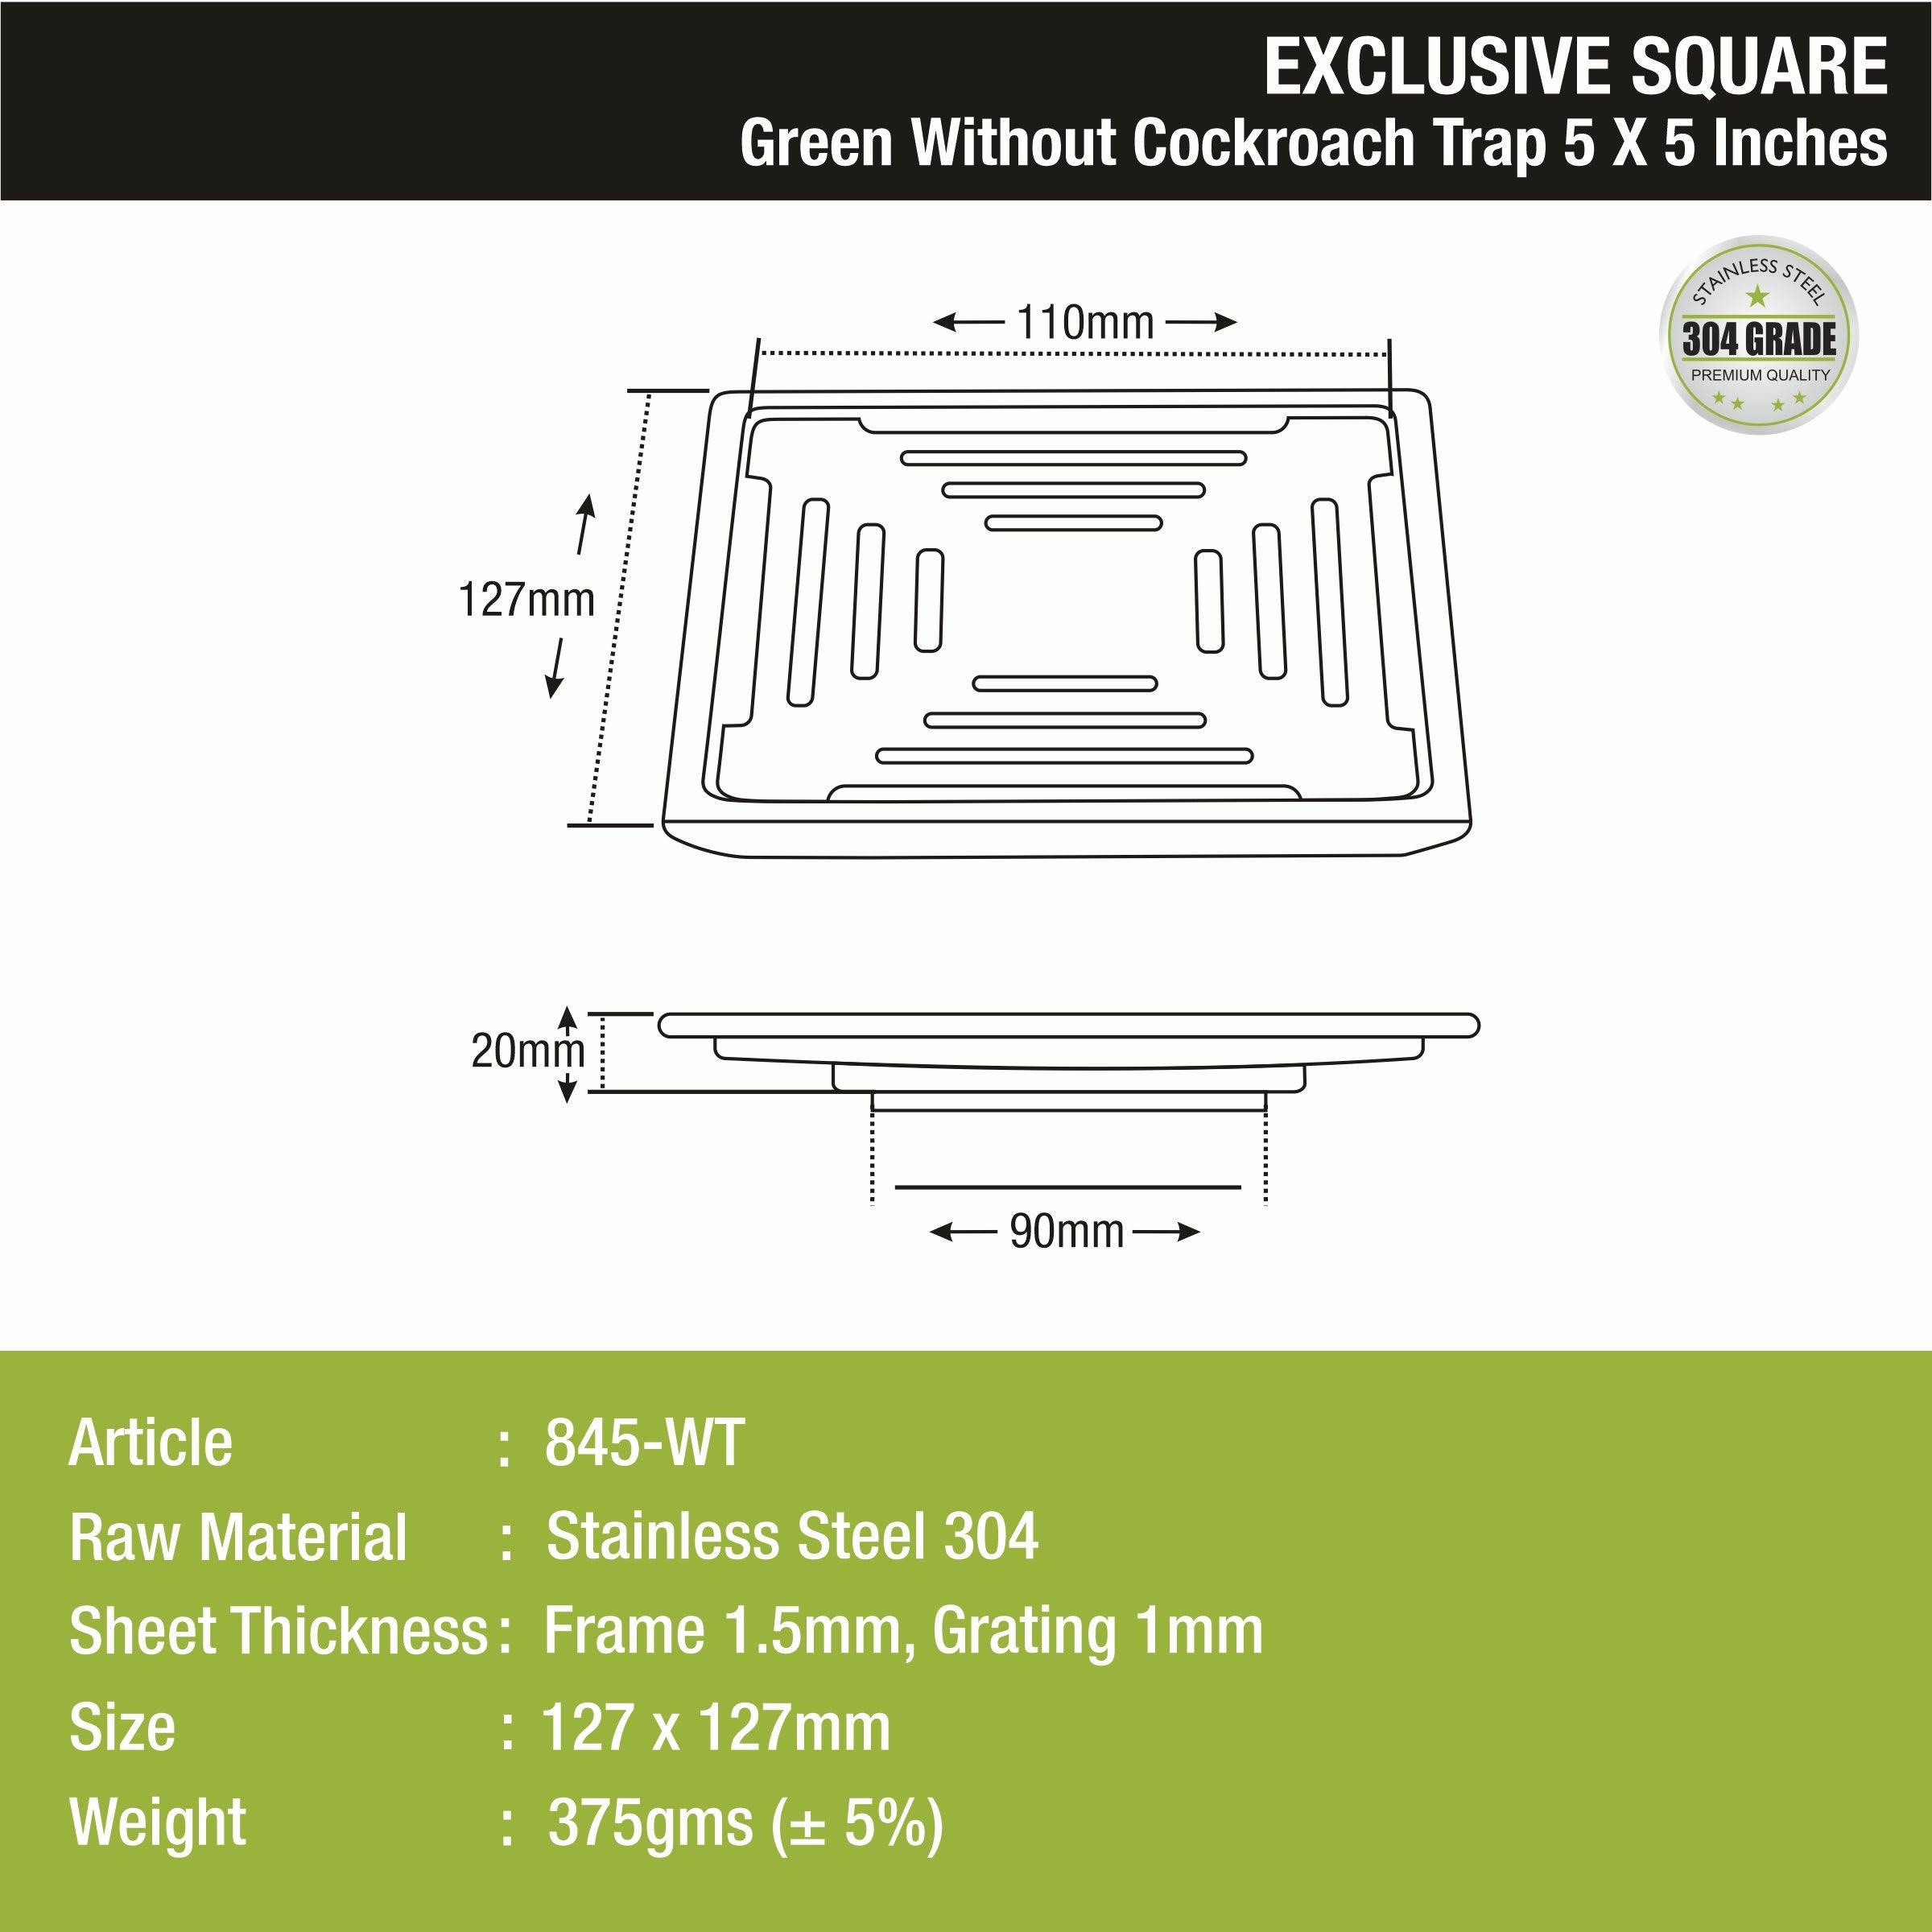 Green Exclusive Square Floor Drain (5 x 5 Inches) sizes and dimensions